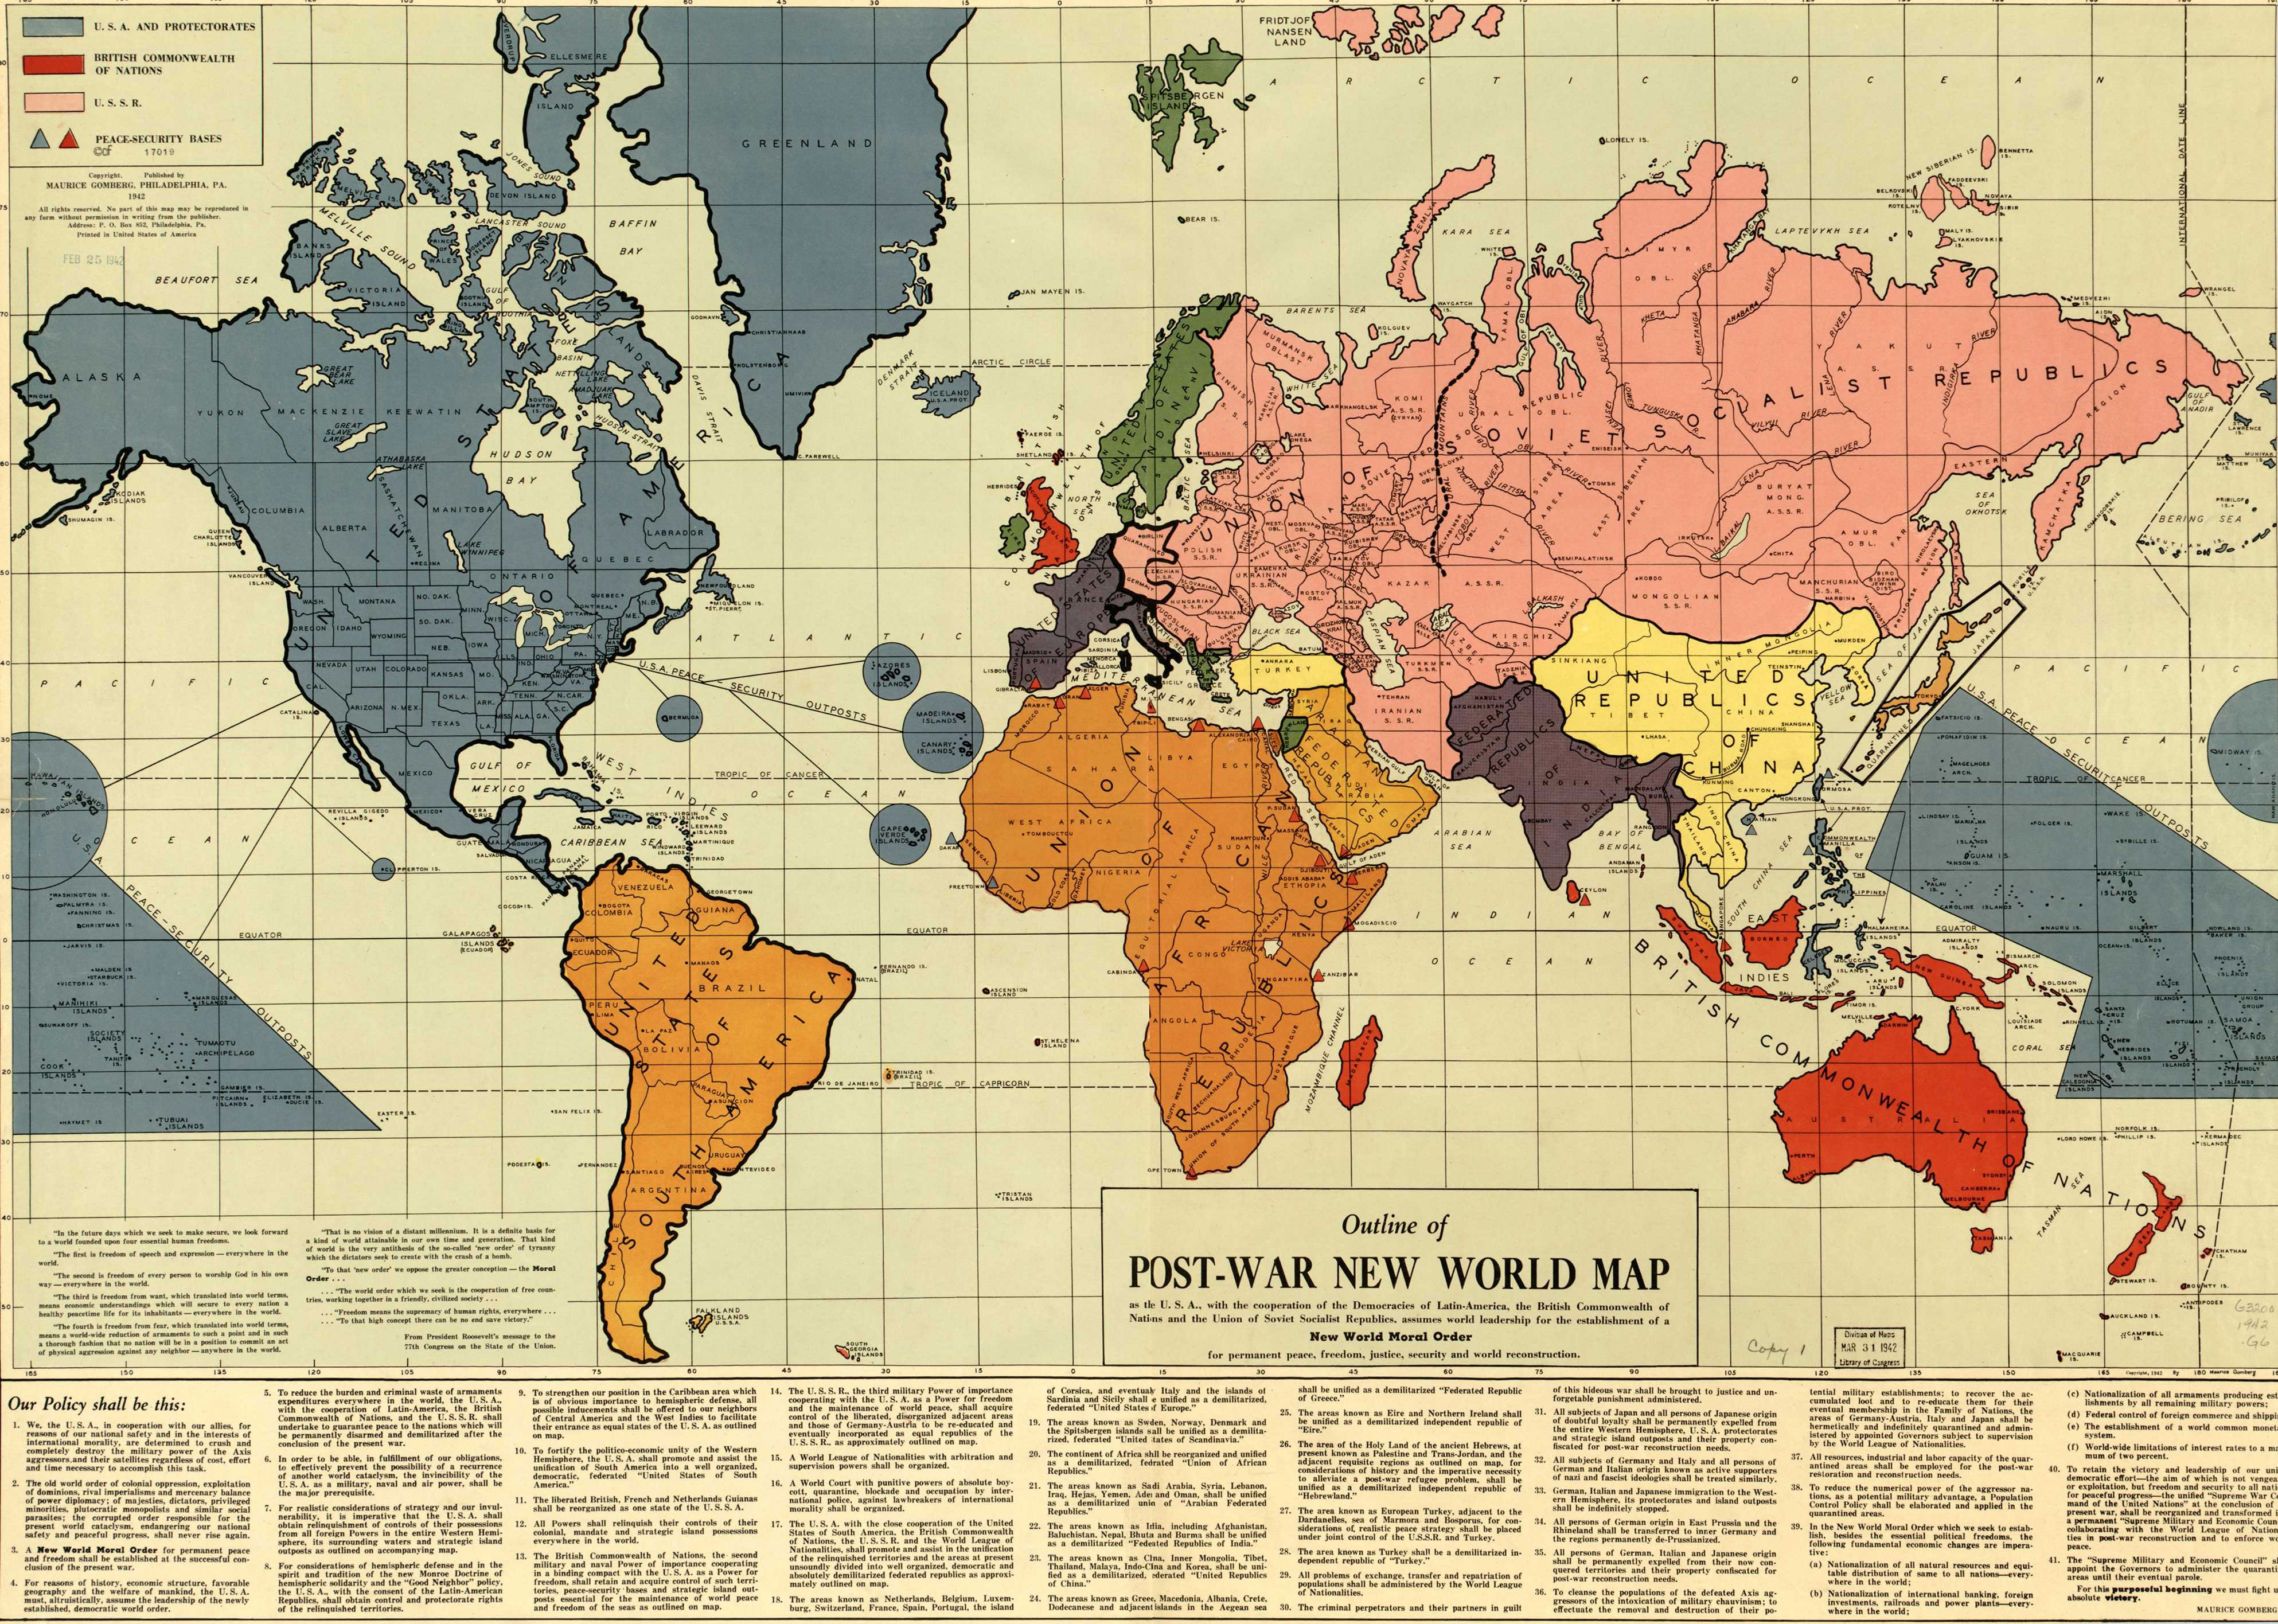 Outline of the Post-War New World Map - Wikipedia